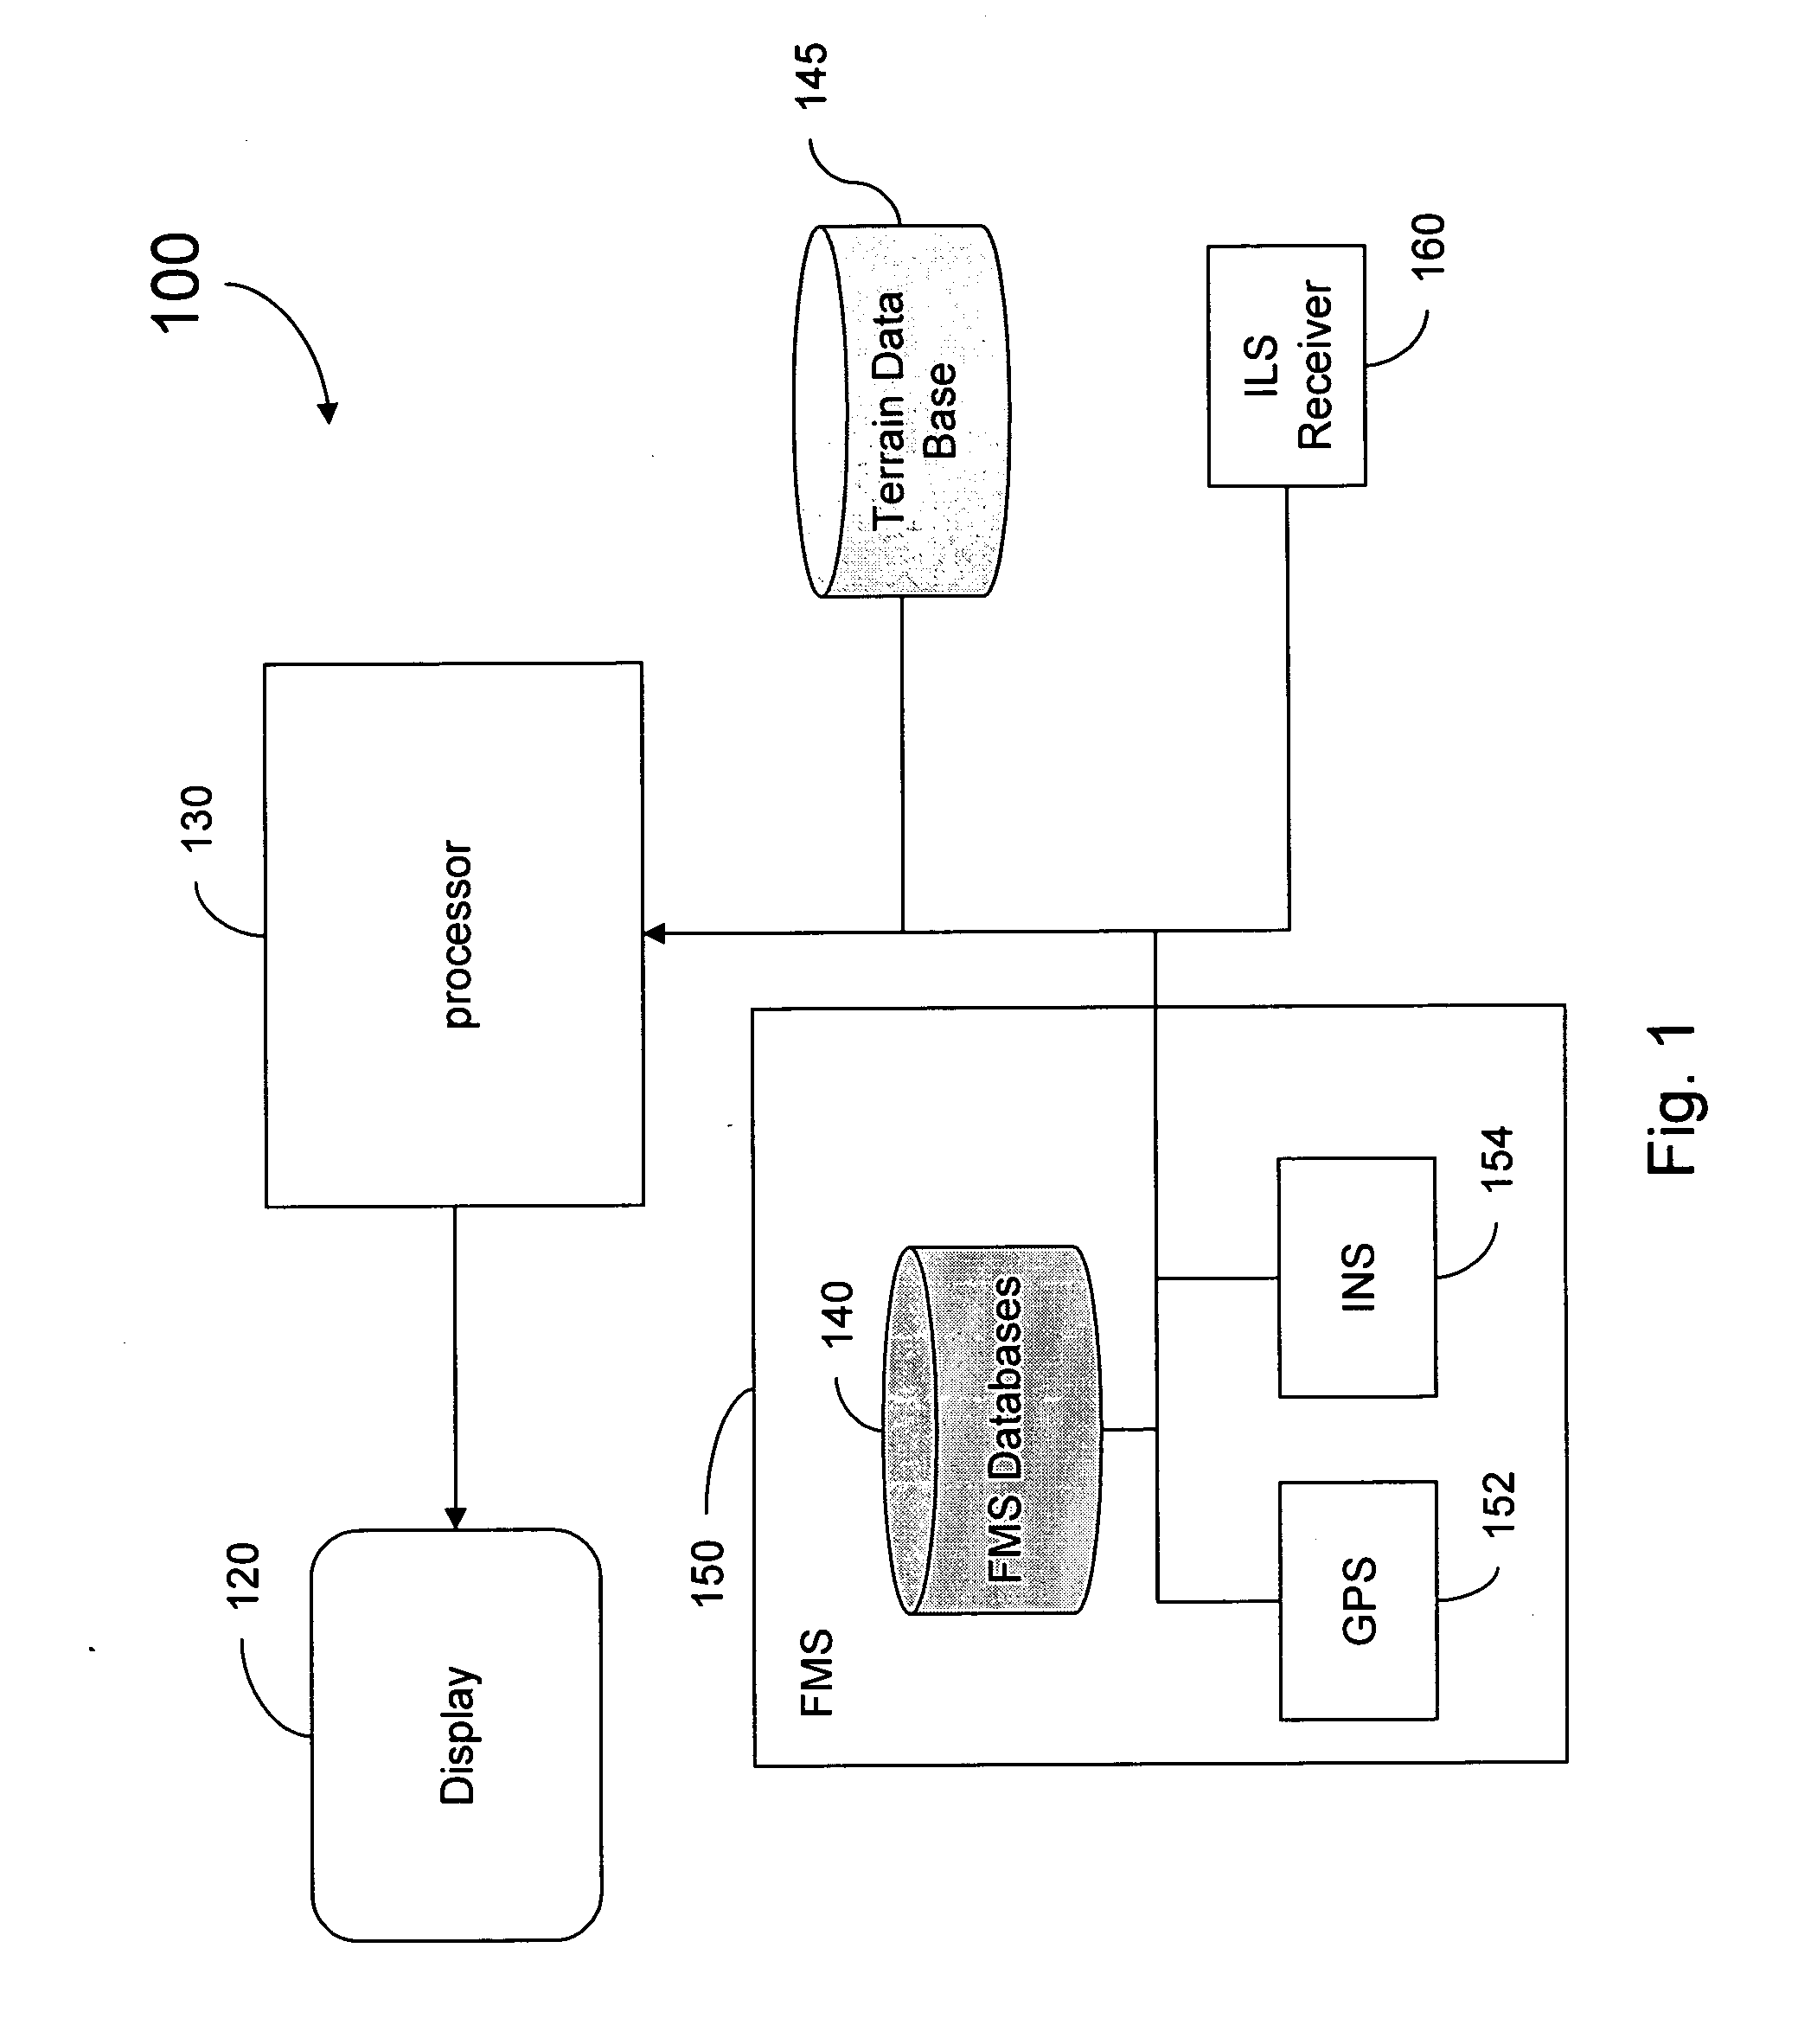 Methods and systems to accurately display lateral deviation symbology in offset approaches to runways